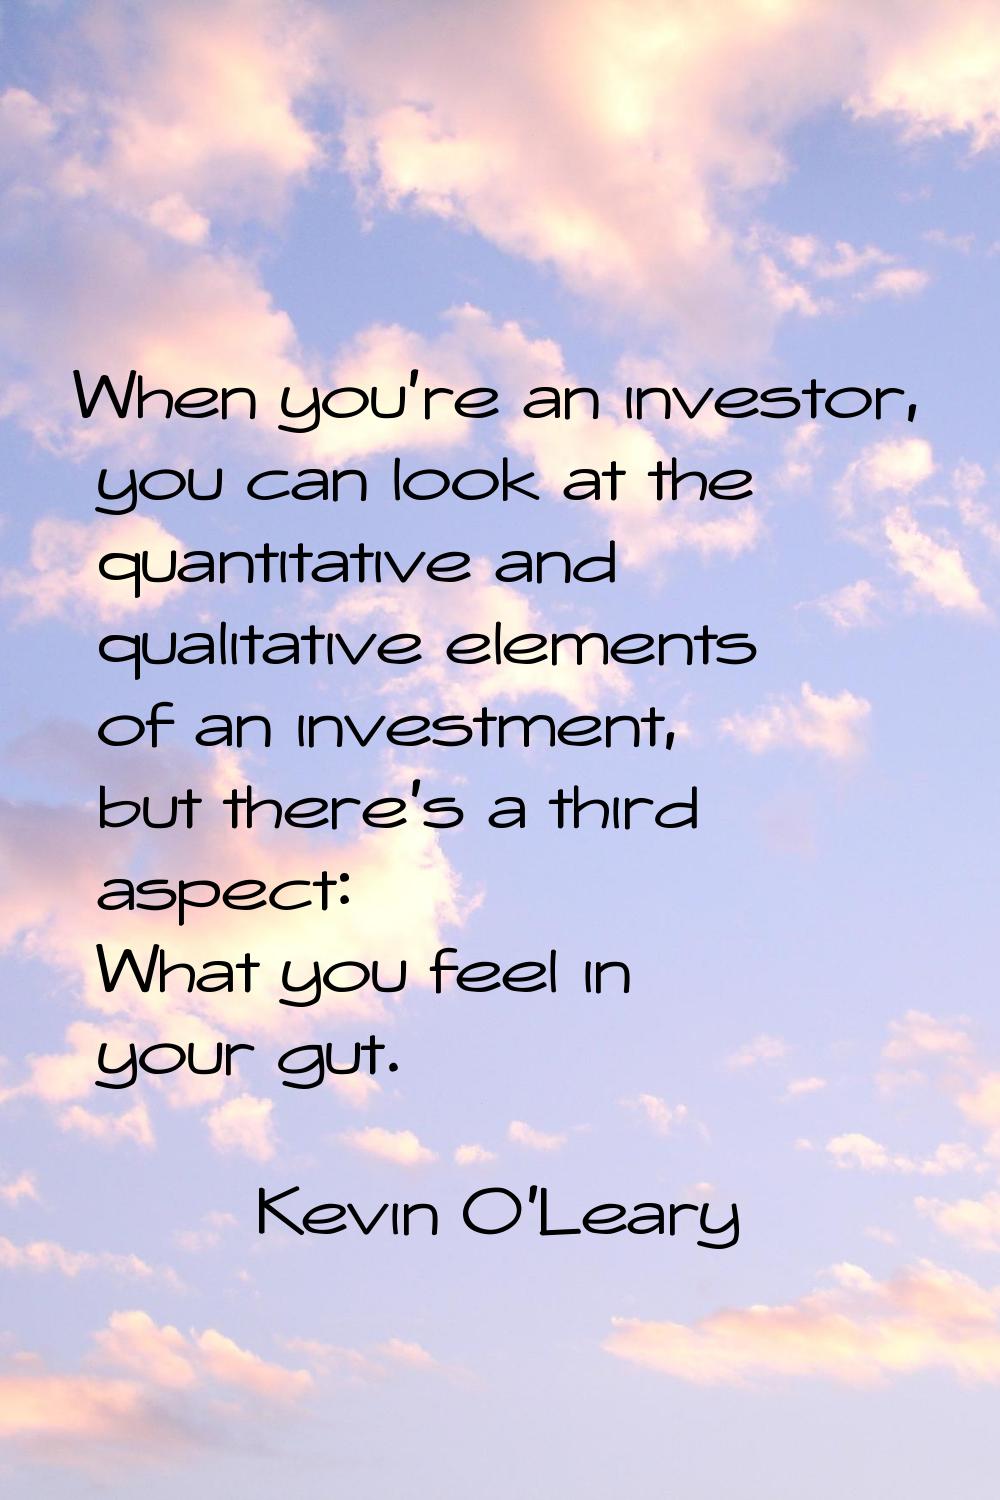 When you're an investor, you can look at the quantitative and qualitative elements of an investment